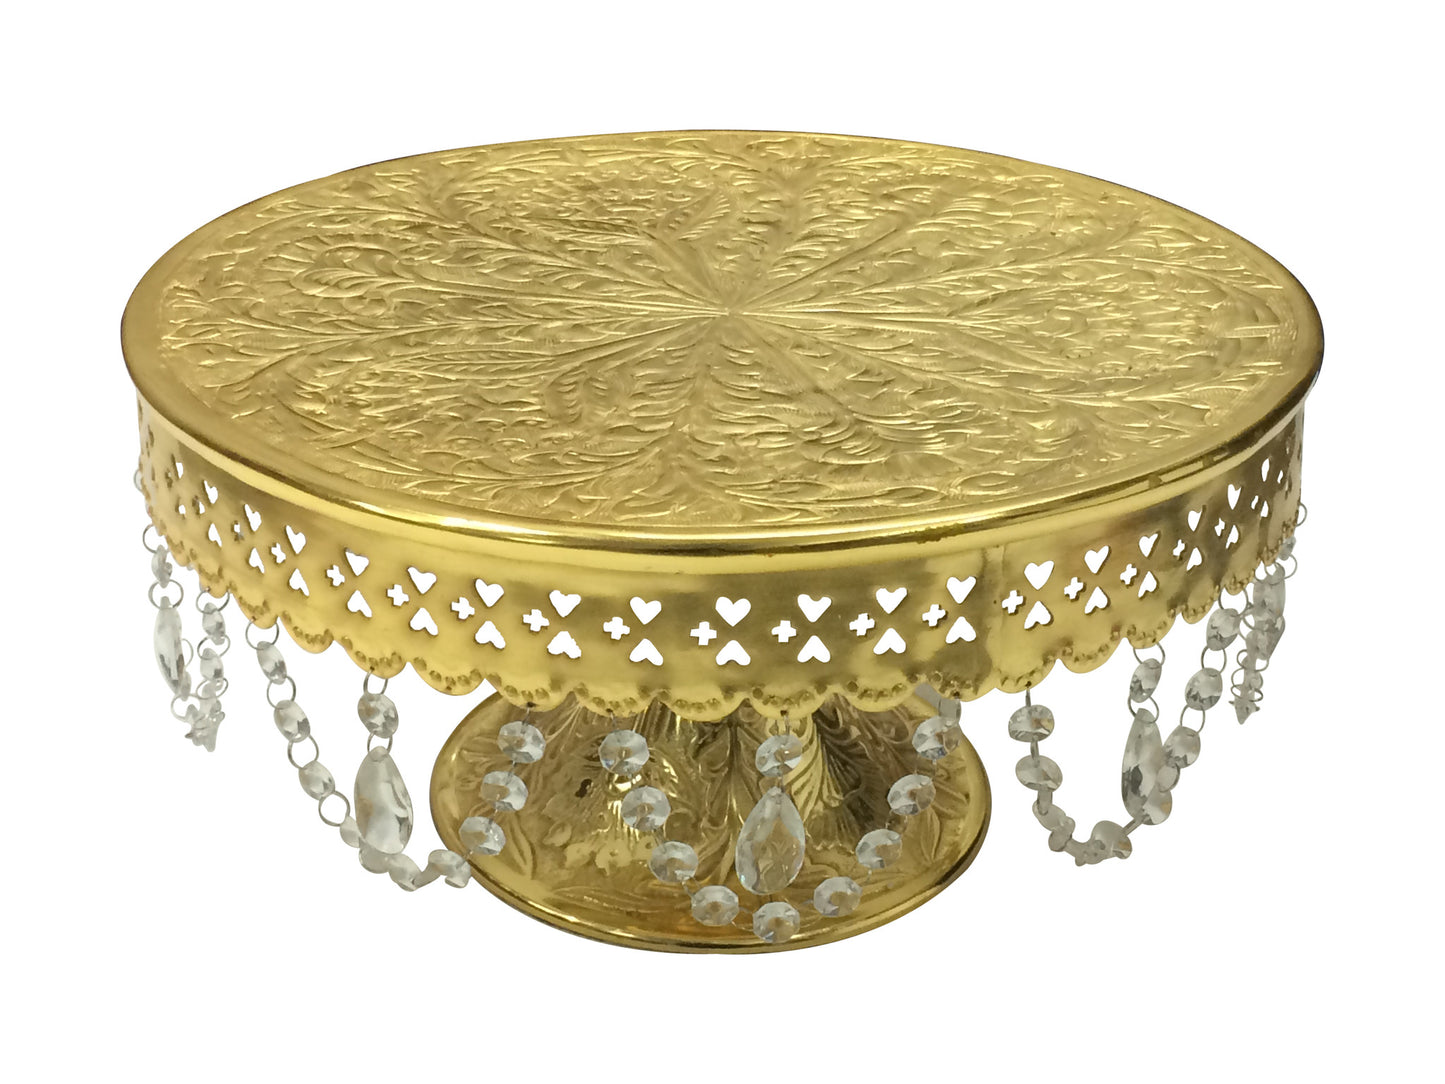 GiftBay Creations® Pedestal Cake Stand Gold, 16" with Clear Crystals